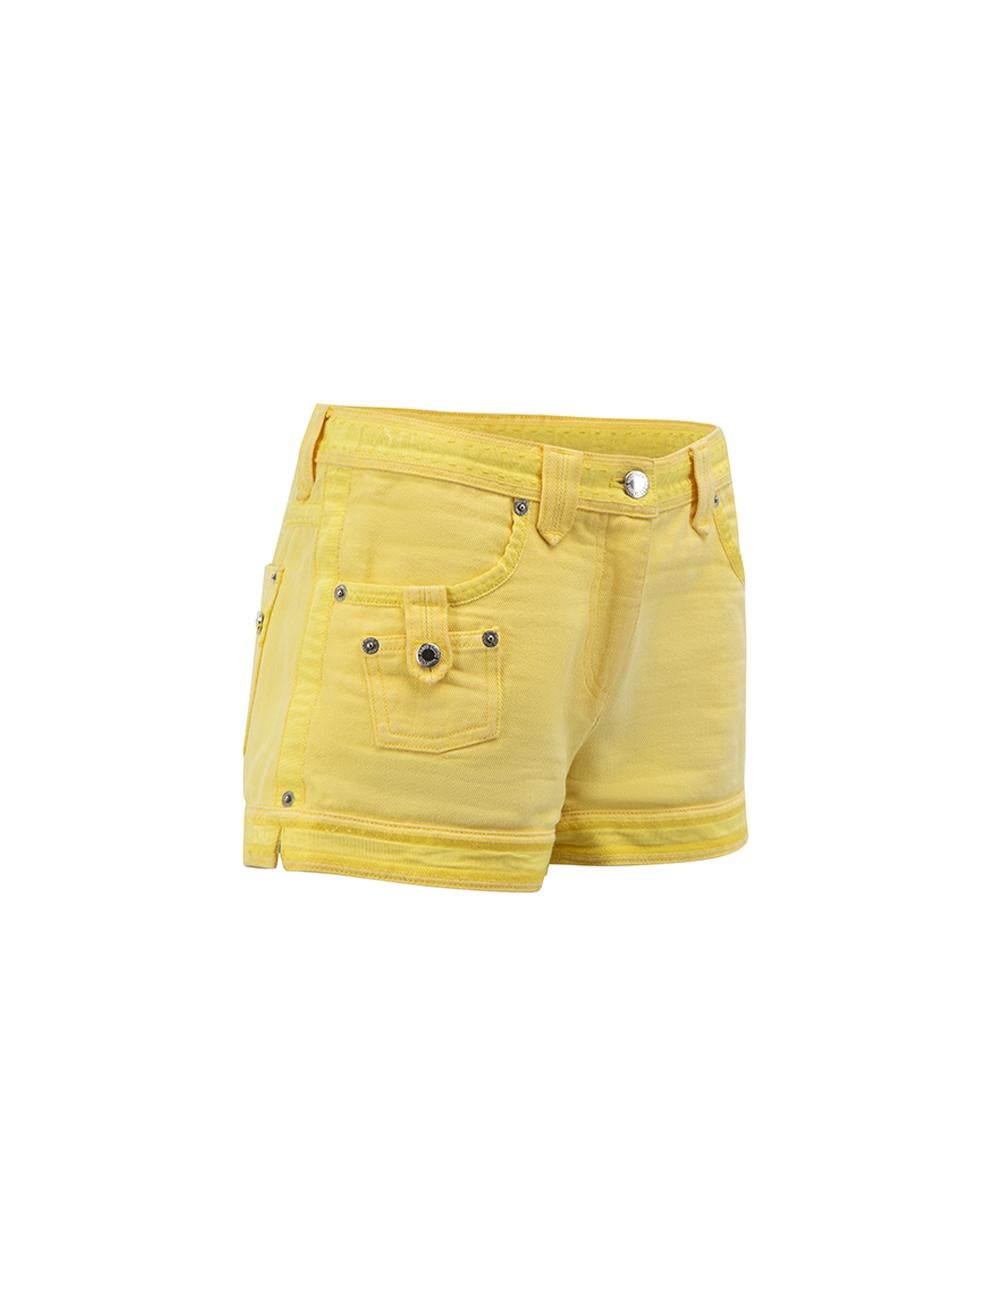 CONDITION is Very good. Minimal wear to shorts is evident. Minimal wear to the outer denim fabric which is slighty discoloured on this used Louis Vuitton designer resale item. 



Details


Yellow

Denim

Shorts

Low rise

Front zip closure with